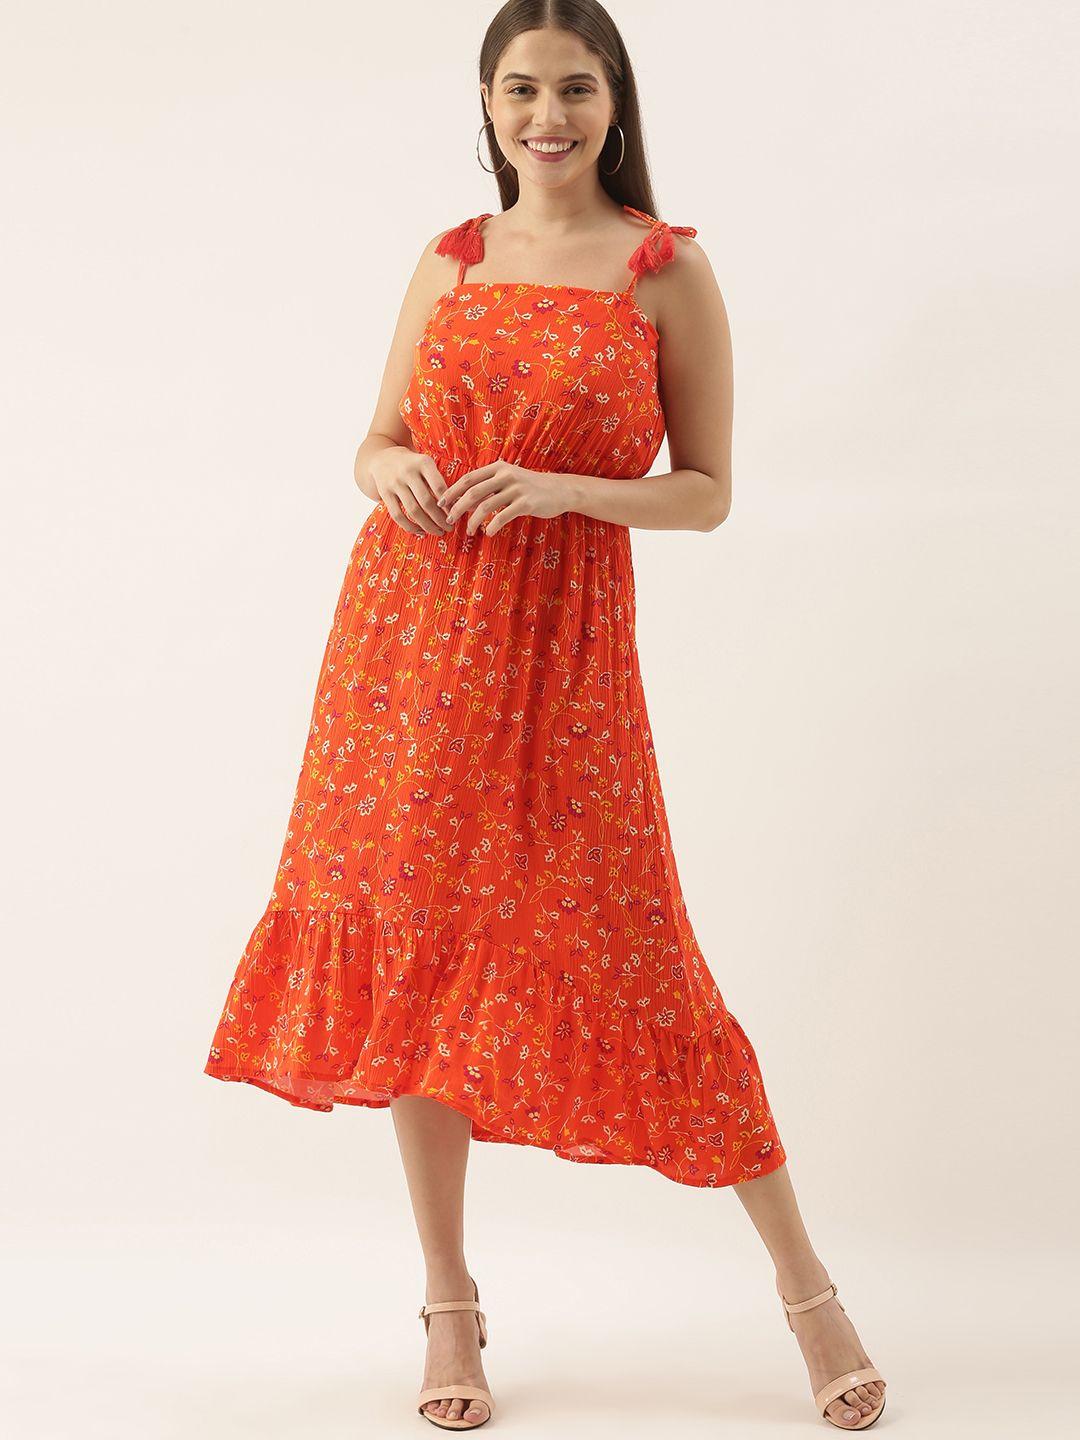 dressberry women orange & yellow floral printed fit and flare tiered midi dress